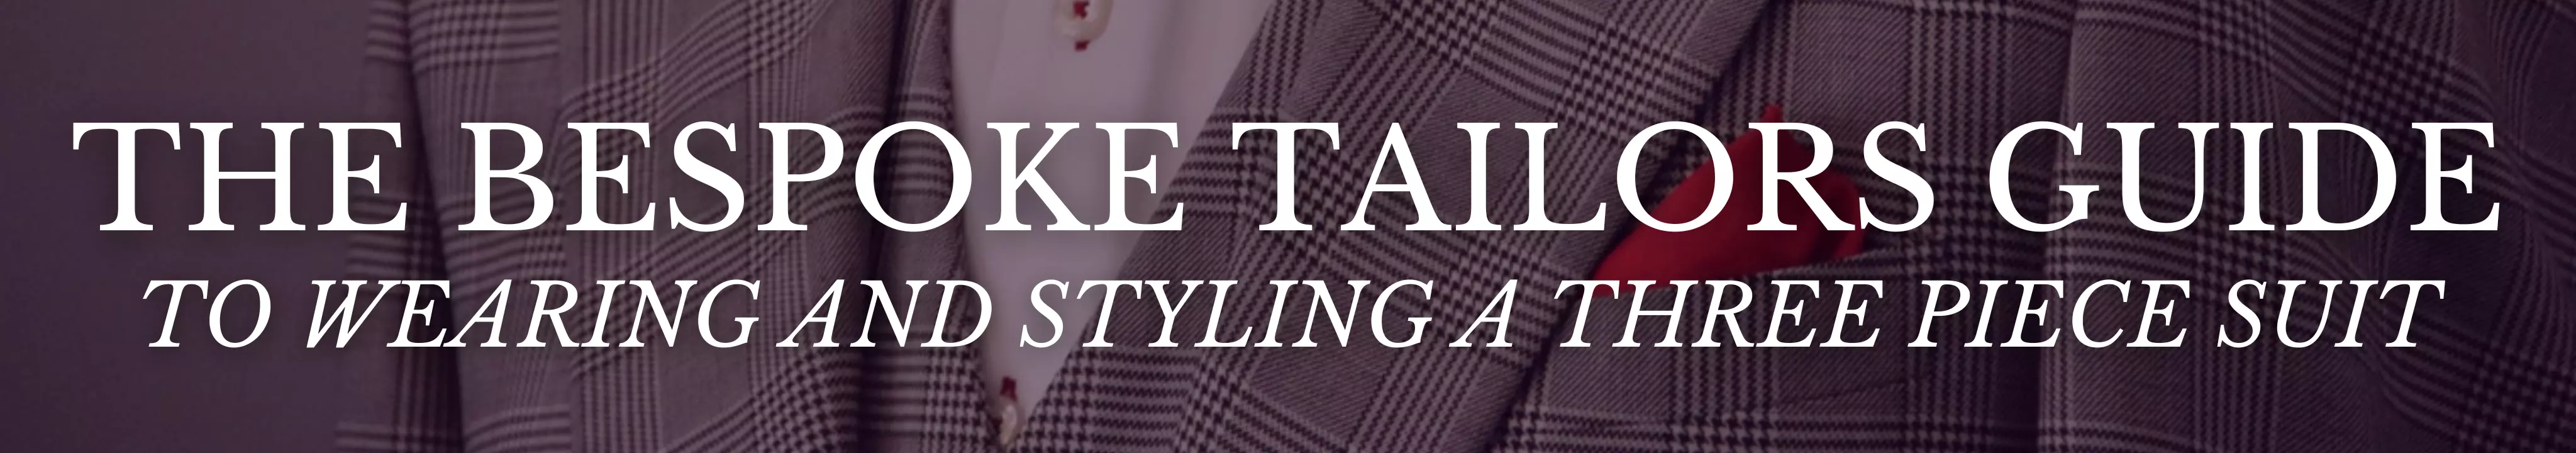 The Bespoke Tailors Guide to Wearing and Styling a Three Piece Suit